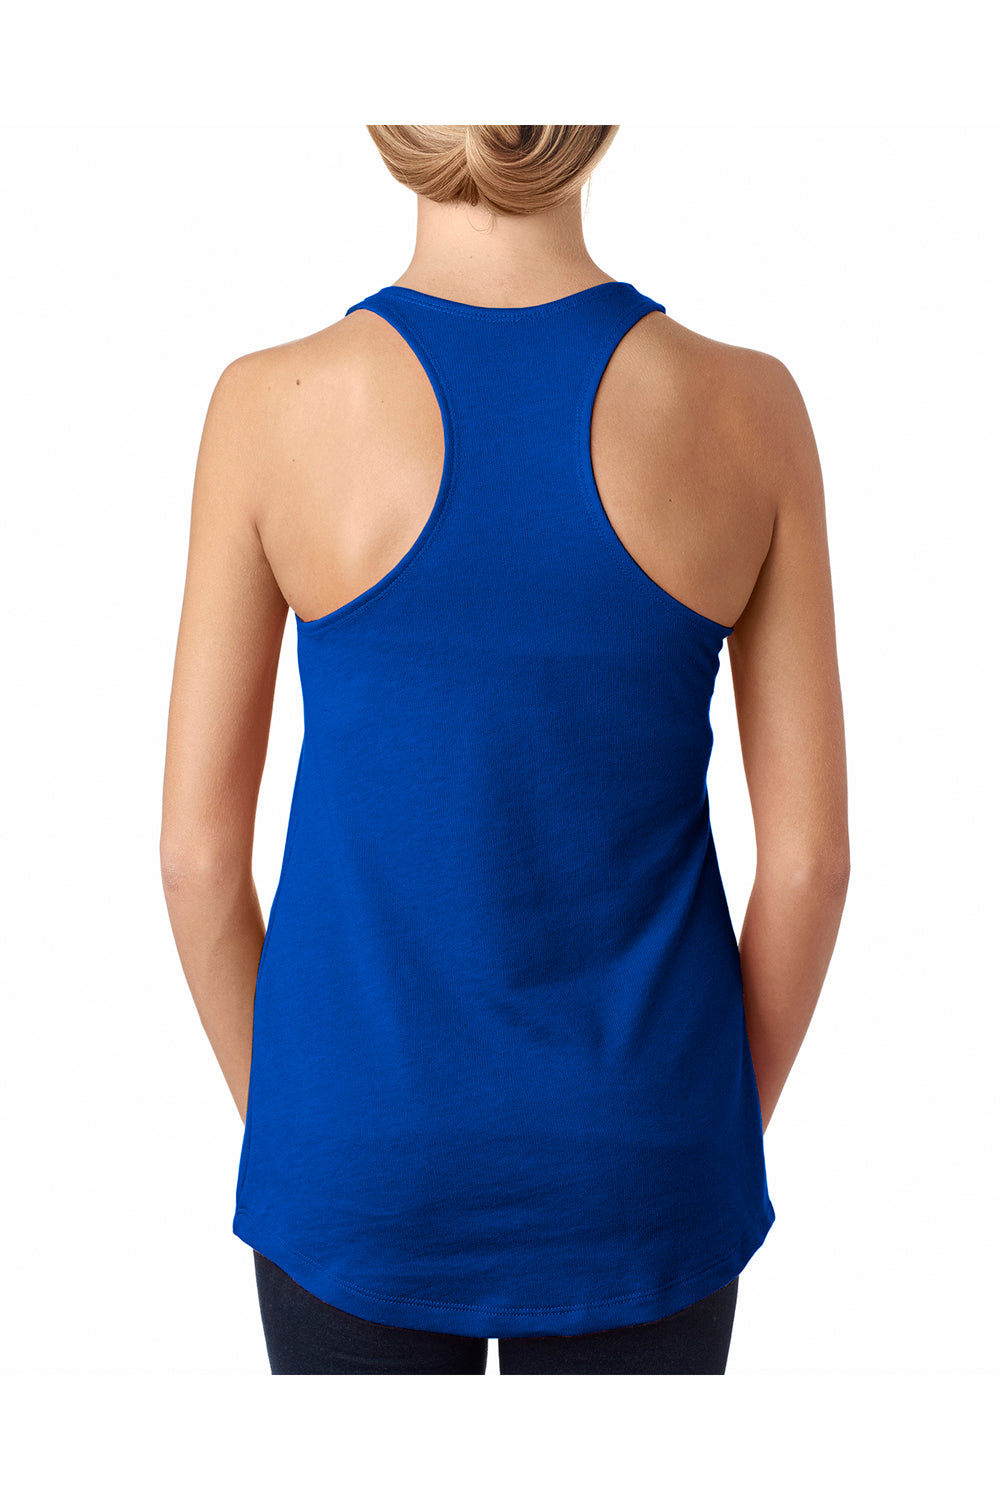 Next Level 6933 Womens French Terry Tank Top Royal Blue Back